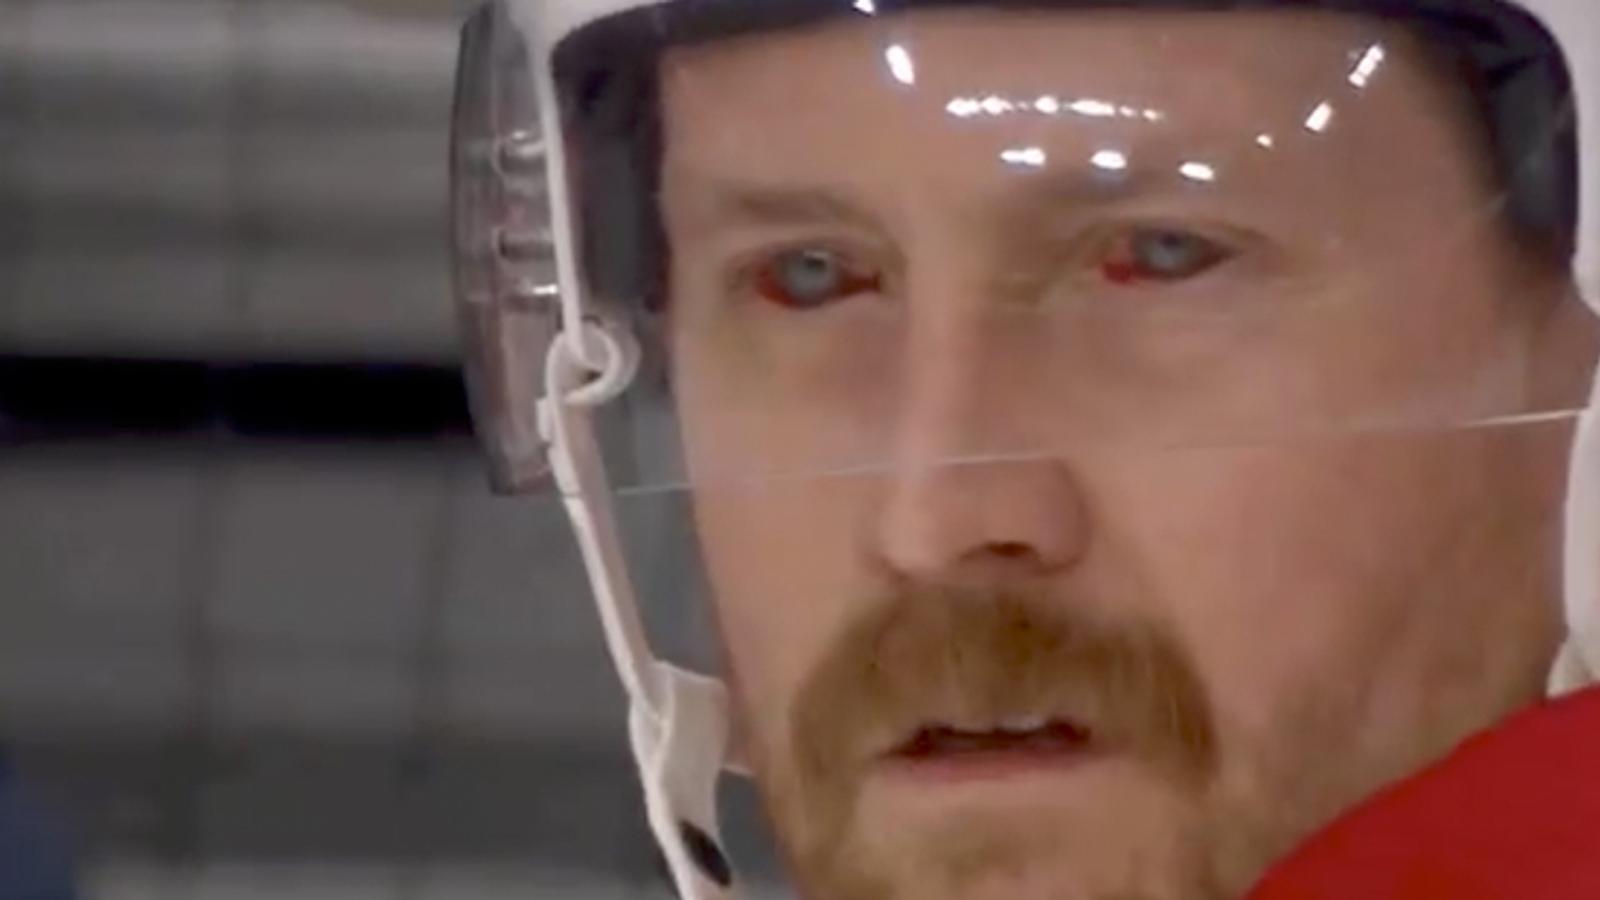 Fans can’t get over Jeff Petry’s bloodshot eyes